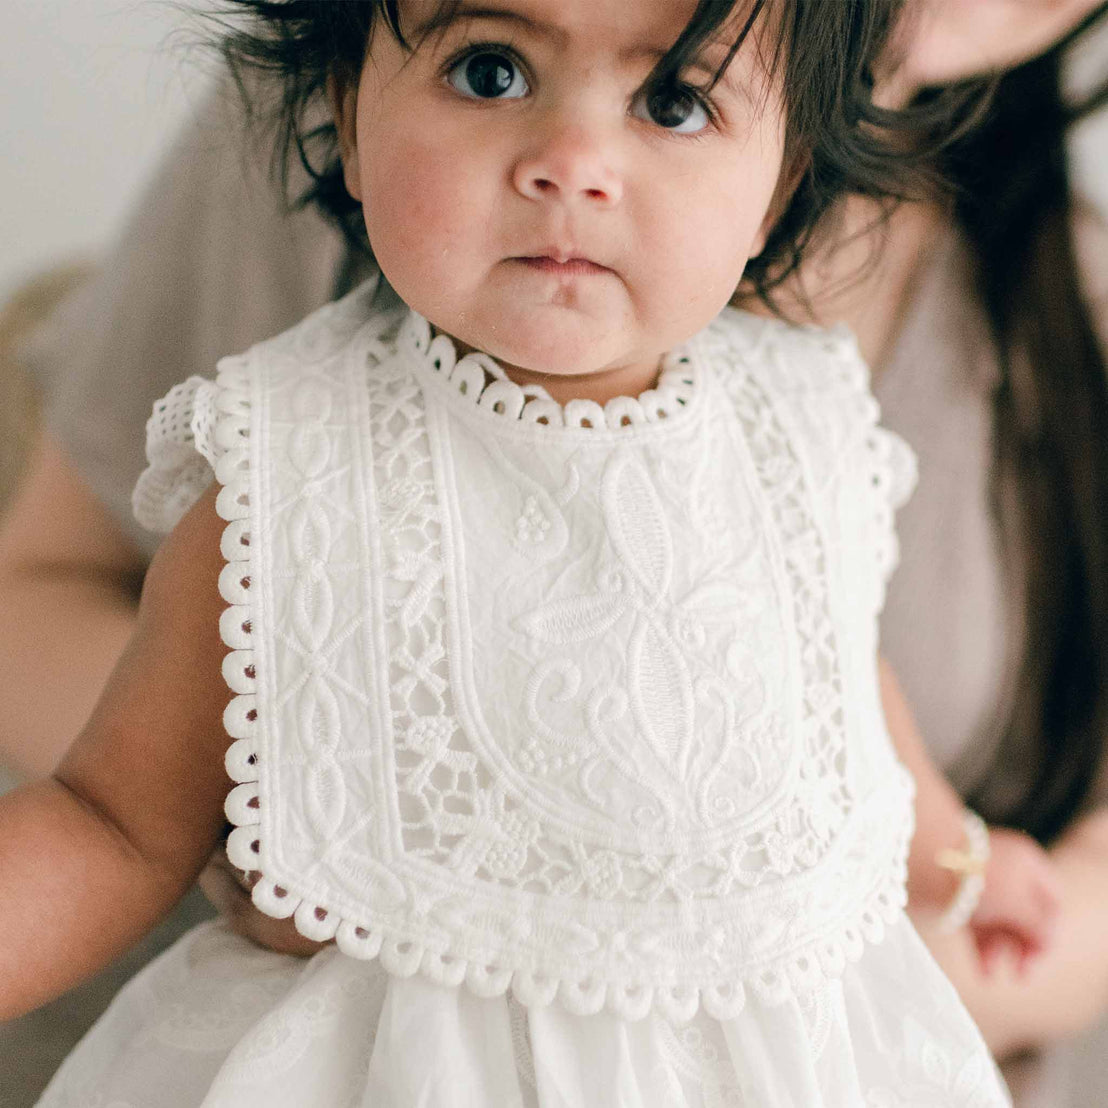 Baby wearing the Lily Lace Bib that is made out of cotton lace in light ivory and exhibits a unique squared design and circle lace trim